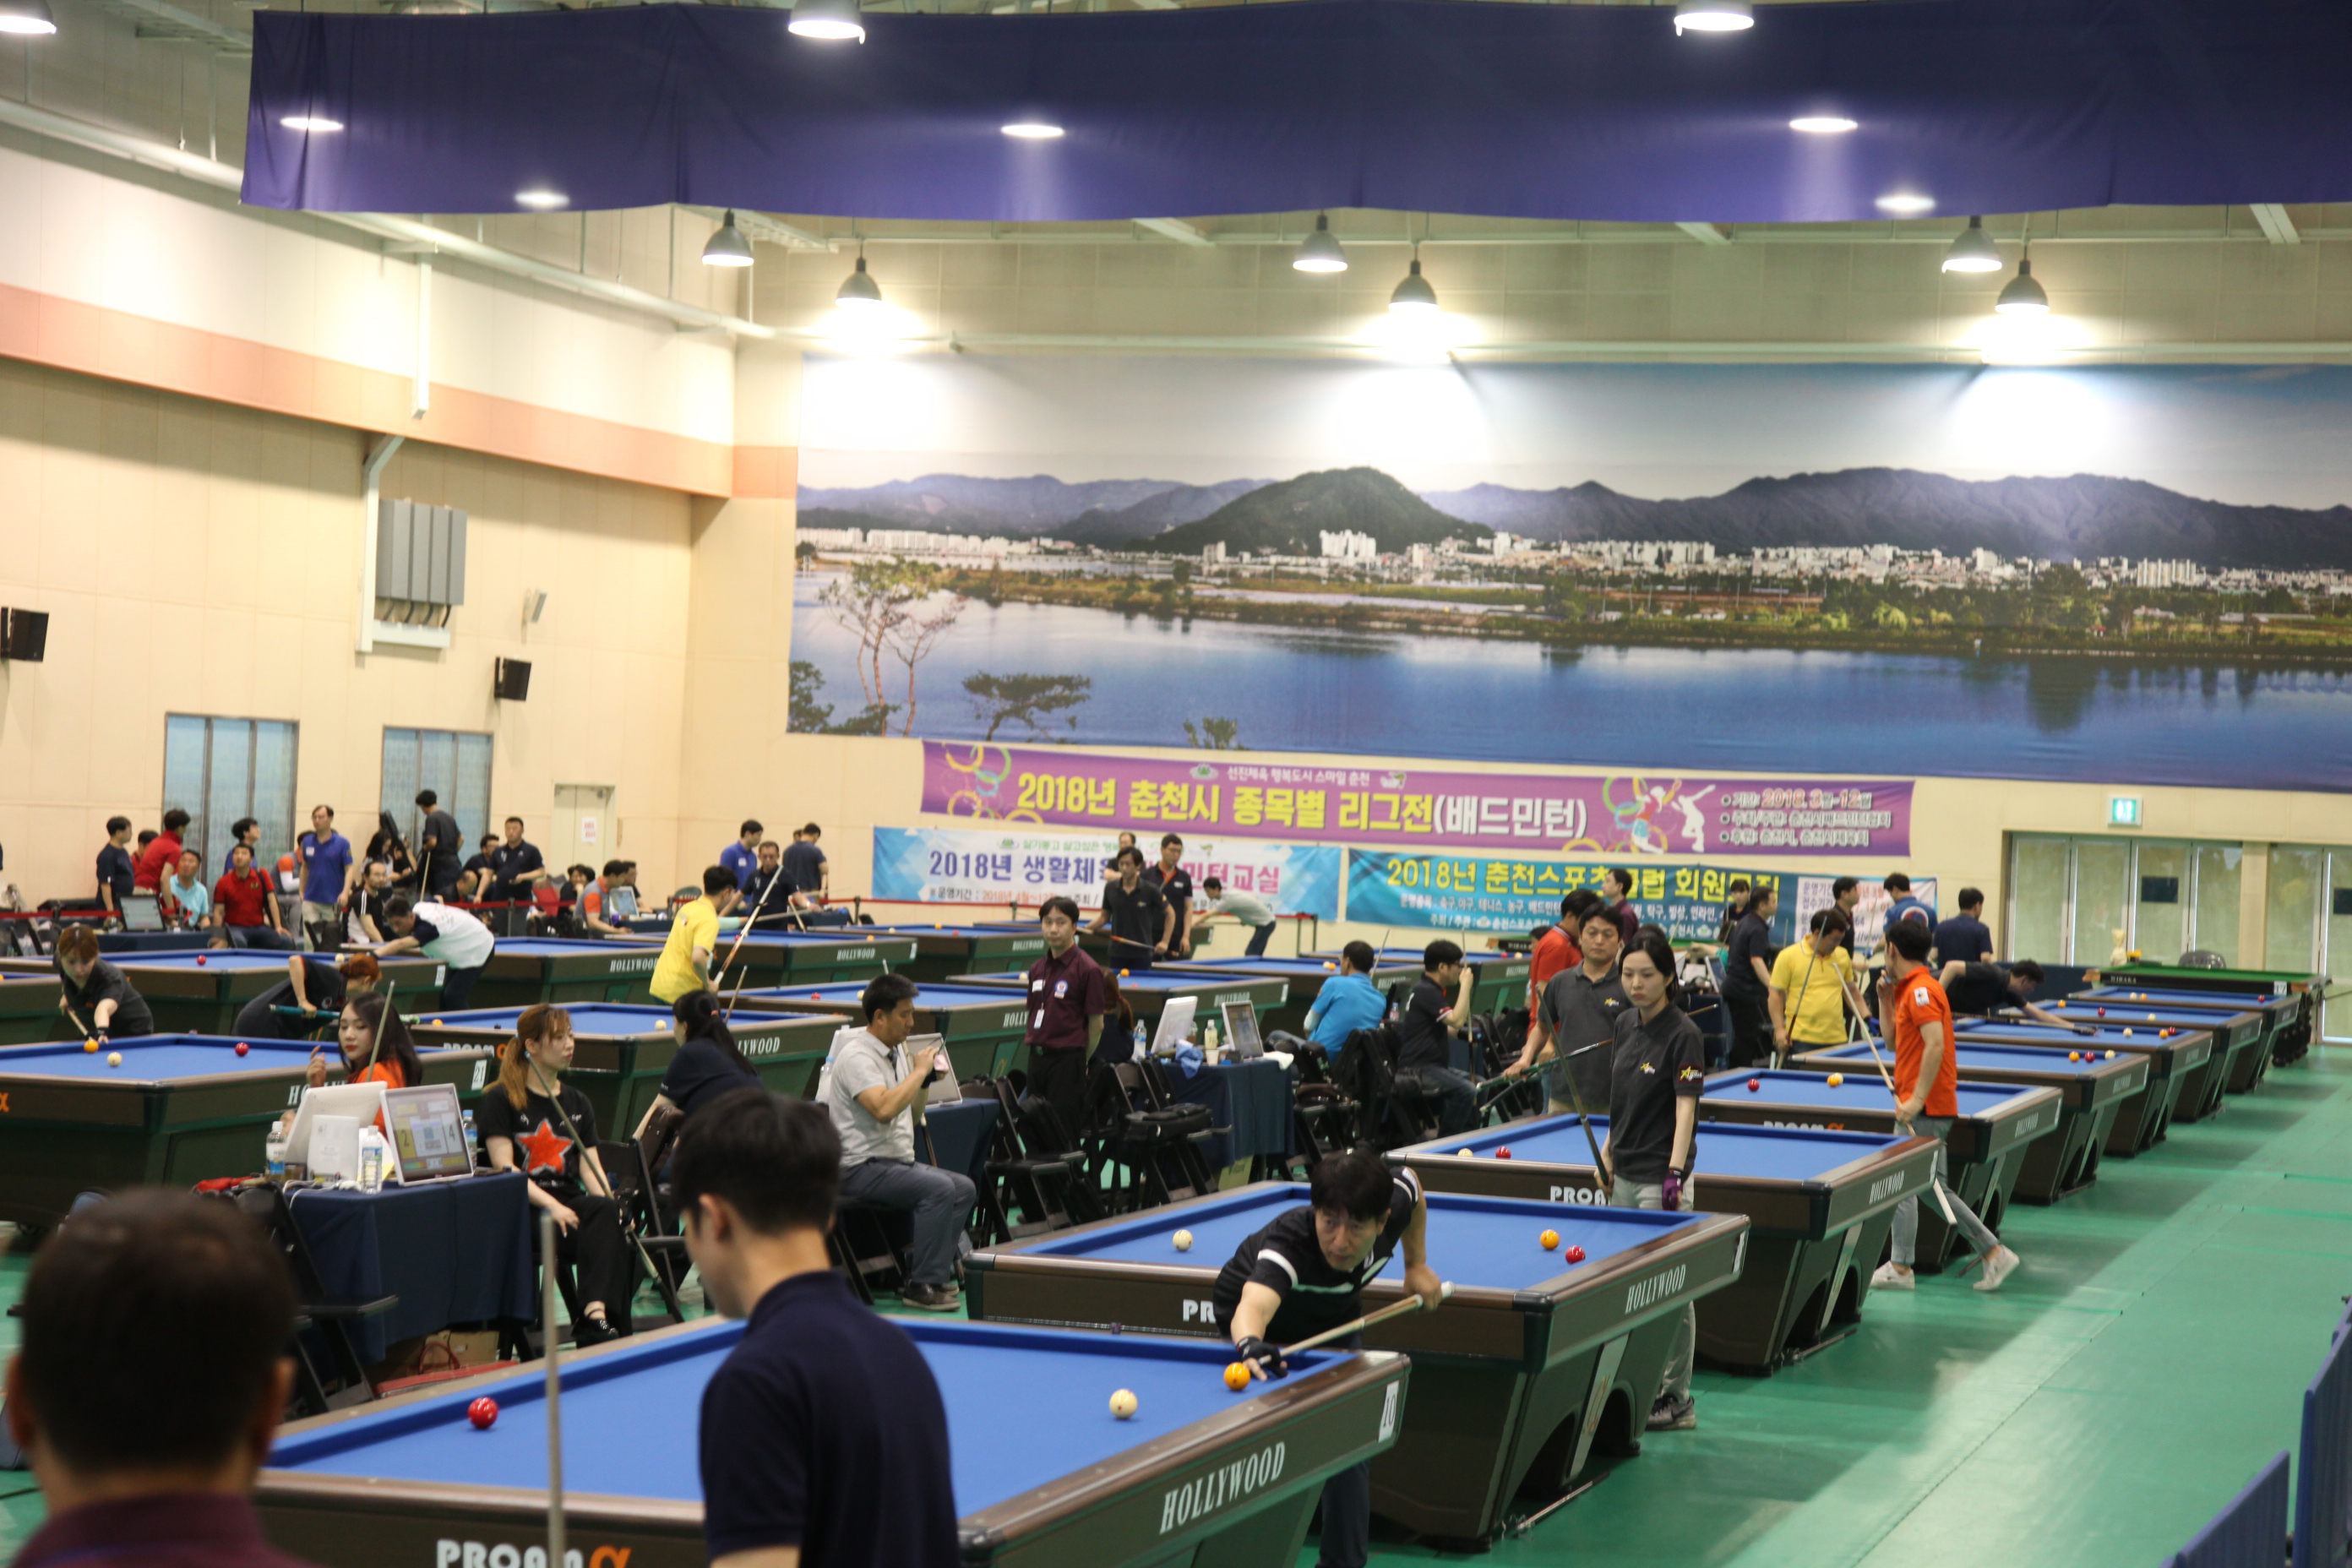 The Billiard League (Chairman Nam Sam-hyun) recently announced on the afternoon of the 18th that he will deprive the winner of the winner Shin Dongho, who was suspected of cheating, of the three cushions part 2 of the Billiard Leagues All States Billiards Competition (hereinafter the Billiard League chairman).The second part of the Billiard League will only be available for the International Battalion, Bae Suzy 26 or less.However, suspicions were raised that the Bae Suzy of Shin Dongho was 27 ~ 28 points at the competition site, and the Billiard League asked the Shin Dongho to prove that it was Bae Suzy 26 points.As a result, Shin Dongho was found to have registered Bae Suzy 27 points in the competition, including A Year Ago in Winter The Billiard League, and The Billiard League canceled the Shin Donghos championship by judging it as a negative handy case.The Billiard League chairmans second division victory went to the existing second-placed Yoo Jun-hyuk Shin Dongho (Underspin).The Shin Dongho Innocence Handy case was deliberated by Kim Bong-soo, chairman of the Billiard League, Kwon Ik-jung, chairman of the judging committee, and Moon Seung-man, chairman of the sports club.The negative handy controversy just before the final matchThe illegal handy case broke out ahead of the third cushion second division final, the Billiard League chairman Shin Dongho, held in Chuncheon, Gangwon Province on the night of the 14th.The member of the Underspin Shin Dongho club was told by the Mecca member that he had scored 28 points at the Shin Dongho and Sams Club during the conversation between the members of the Mecca Shin Dongho.UnderspinShin Dongho said that Shin Dongho, who was registered as Bae Suzy 26 points, received a report that he was Kyonggi for 28 points in Sams Club Kyonggi, and that Shin Dongho was a negative handy I raised the suspicion.In response, the Tass Donghoe side has never done that, and Bae Suzy refuted that it was based on Shin Donghos regular data.When the finals were delayed for a considerable period of time due to the friction between the two Shin Dongho meetings, The Billiard League operations team called in a informant who said, I confronted Shin Dongho and BShin Dongho who scored 28 points (at Sams Club).The International Software Federation asked Shin Dongho about whether he was handy 28 points Kyonggi and Shin Dongho denied it.We will take responsibility for this situation and submit evidence, Tass said. The finals were held later.Kyonggi ended with a victory by Shin Dongho to win the championship.Controversy persists after the end of the competition...the federation also decided to make regulations.However, after the end of the competition, this handy controversy was a hot potato among Shin Dongho people.The Shin Dongho and Underspin Shin Dongho groups expressed their positions online, including SNS (such as Facebook) and blogs.In particular, the controversy spread even more as the two Shin Dongho claims were mixed over the reason why Shin Dongho downgraded the handy score.This year, the chairman of The Billiard League, Shin Dongho, will be able to participate in the second part of the three cushions of the Shin Dongho.This is a one-point downgrade from the A Year Ago in Winter, and UnderspinShin Dongho claimed that Shin Dongho was one point lower than his Bae Suzy (27 points) for the second part of the Kyonggi competition.When the International Software Federation asked the Shin Dongho side why Bae Suzy was down, the Shin Dongho group claimed that Sams ClubBae Suzy of Shin Dongho was based on Sams Club record thoroughly. I submitted the records of the Club.Shin Dongho, the Shin Dongho, is adjusted once every three months after the regular session.Shin Dongho said, The competitions registered as Bae Suzy for 27 points are data from a year or two ago.Our Shin Dongho society adjusts Bae Suzy once every three months based on the records calculated in its own regular exhibitions.So I played 26 points in this tournament and I put 26 points in all competitions held this year.  I do not care about Woo Seung-hyo.However, the unfair thing is to brand All States Shin Dongho people as negative handyjas. On the other hand, the Underspin Shin Dongho side said, Sams Club can understand the Bae Suzy downward, but it is not understandable that the Bae Suzy registered in the All States competition is lowered by the common sense of domestic Shin Dongho people.Bae Suzy, who has registered for the All States competition, is accepted as accrediting his score to many Shin Dongho people. Meanwhile, it was pointed out that there are no regulations related to illegal handy in The Billiard League among the controversy over Shin Donghos illegal handy.We will soon set up regulations and policies on illegal handy and we will try to prevent such controversy in advance, said the Federations Club Committee (Chairman Moon Seung-man), which oversees the Shin Dongho competition in The Billiard League.International Software Federation Chairman Kyonggi .. Handy 27 points 26 points in the Shin Dongho contest after the International Software Federation deliberation deprived decision Shin Dongho, I do not cheat every three months after regular,